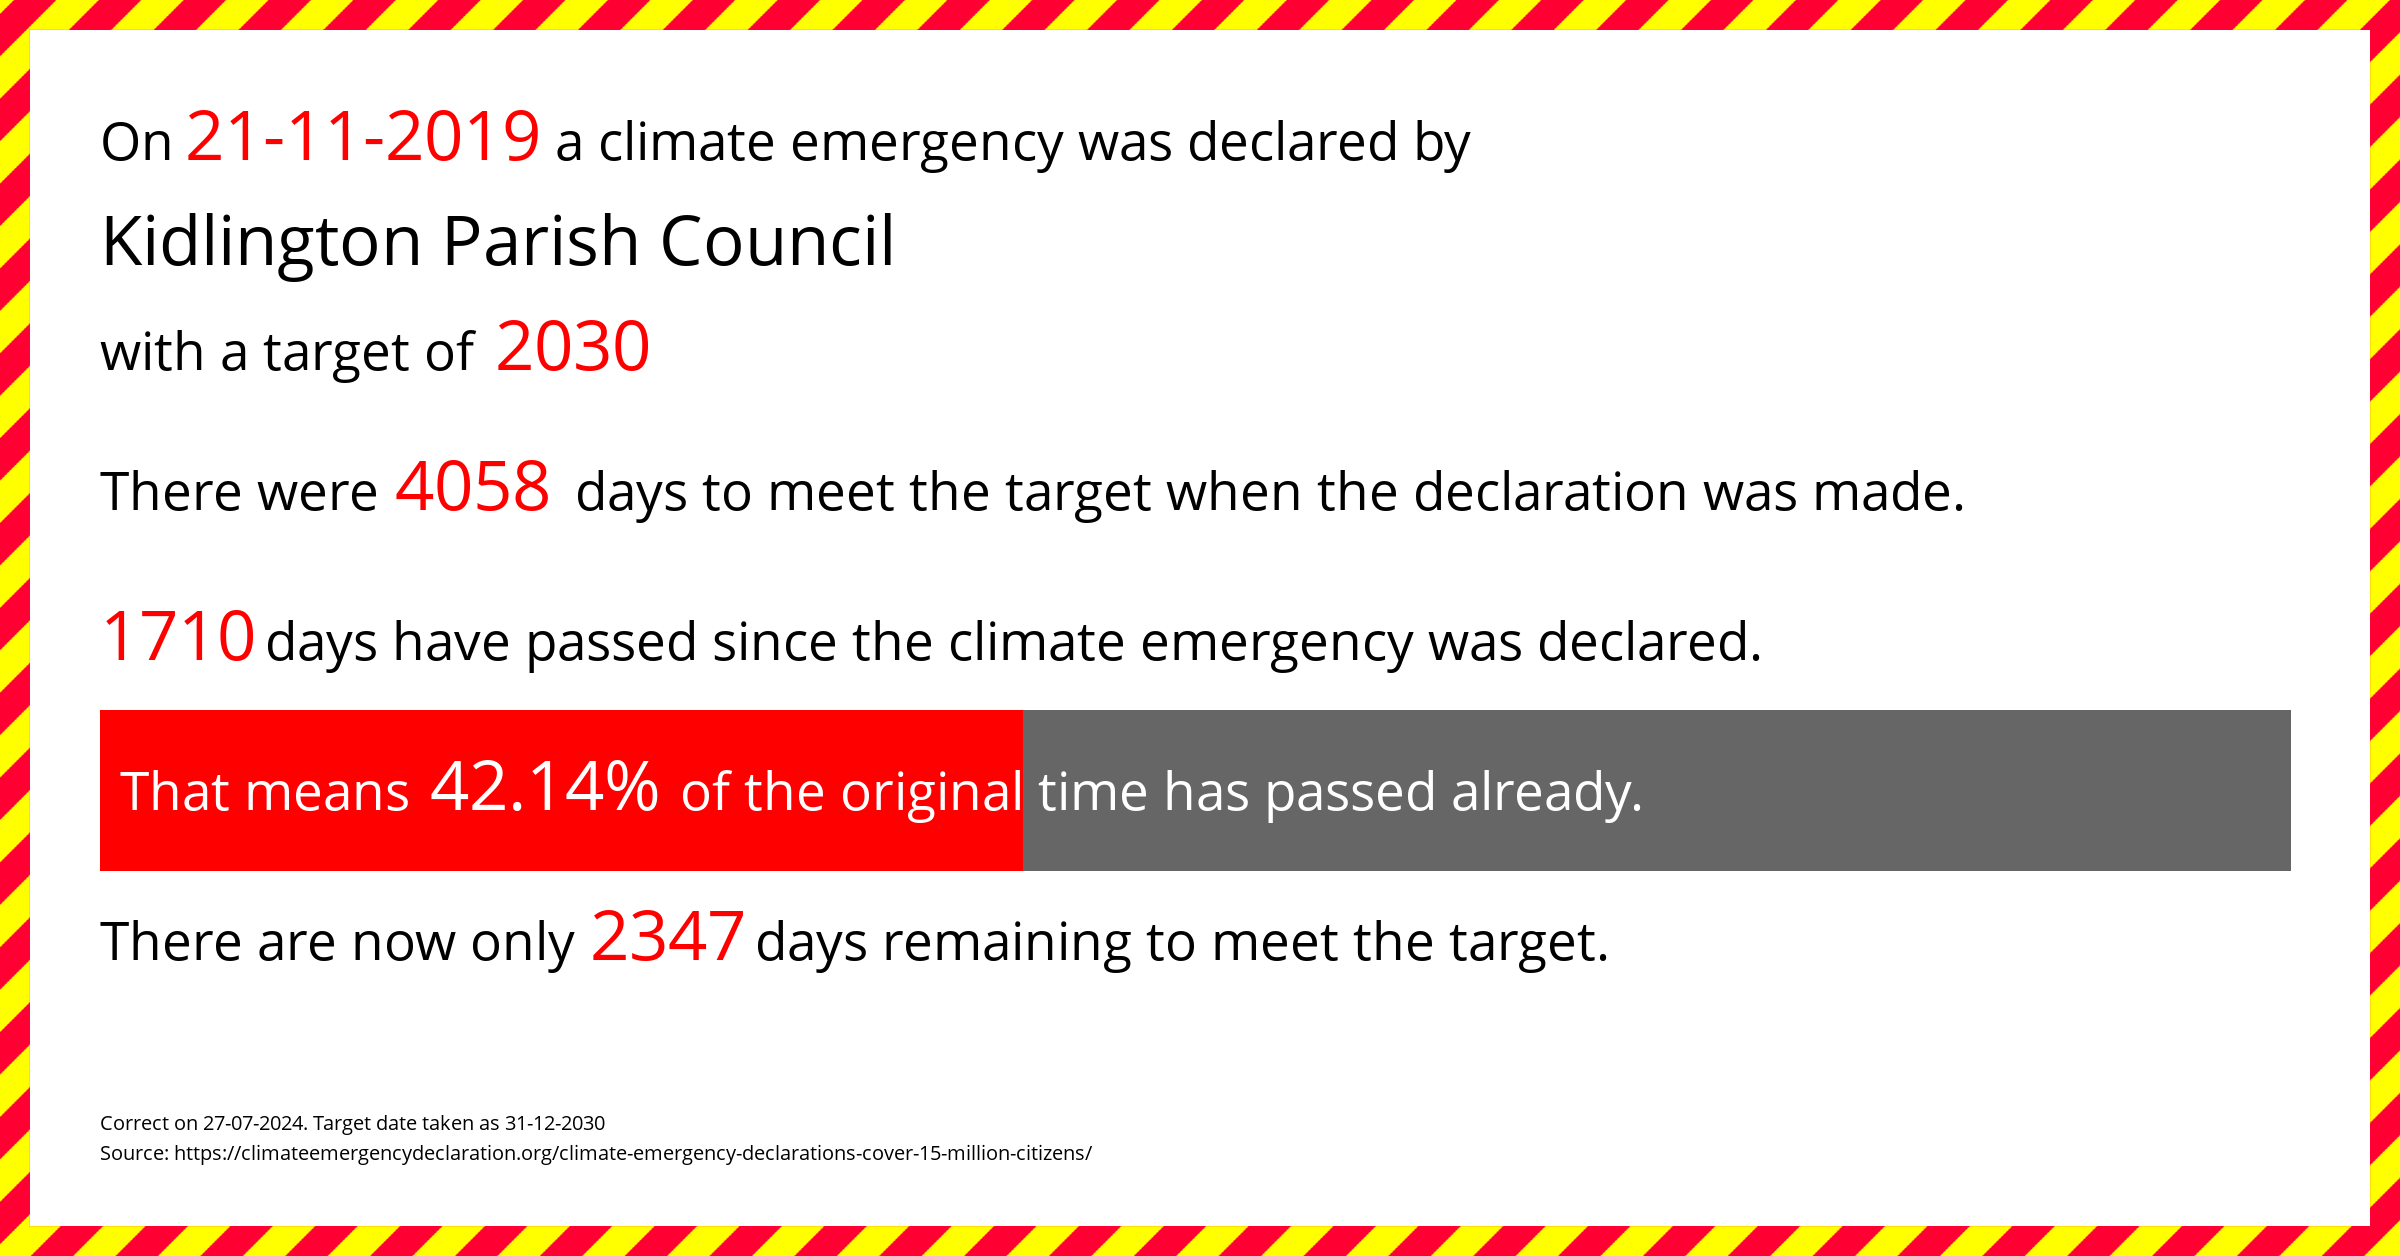 Kidlington Parish Council  declared a Climate emergency on Thursday 21st November 2019, with a target of 2030.